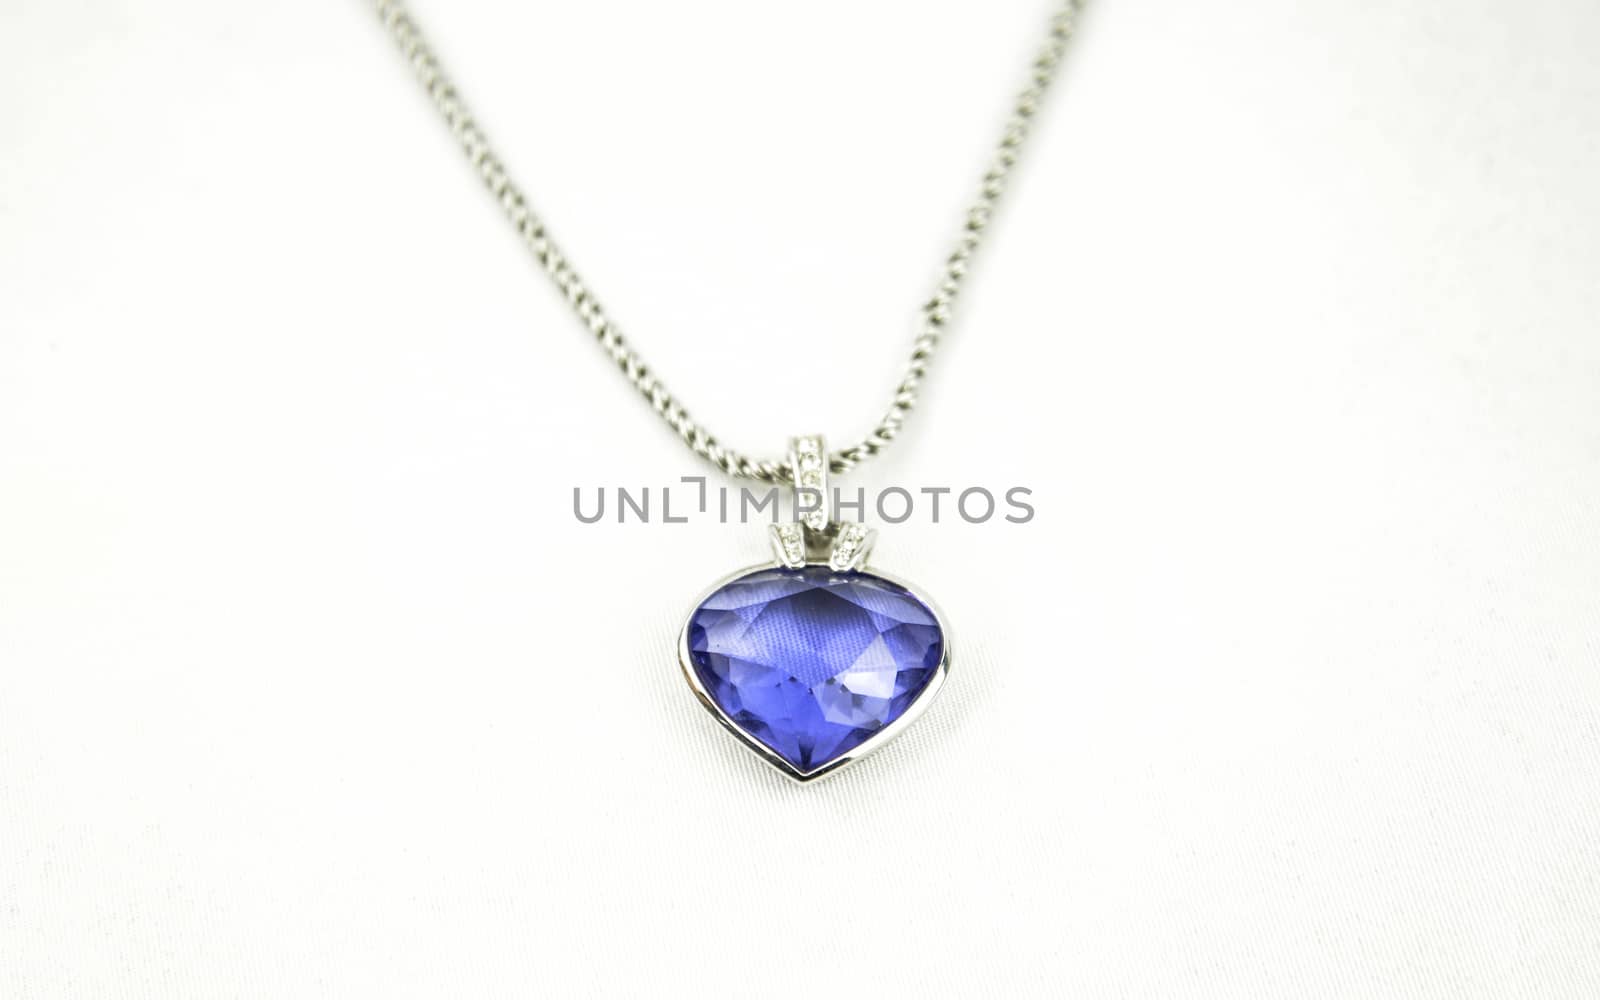 A beautiful pendant with a blue gemstone on the silver neckless isoalted on white studio background.